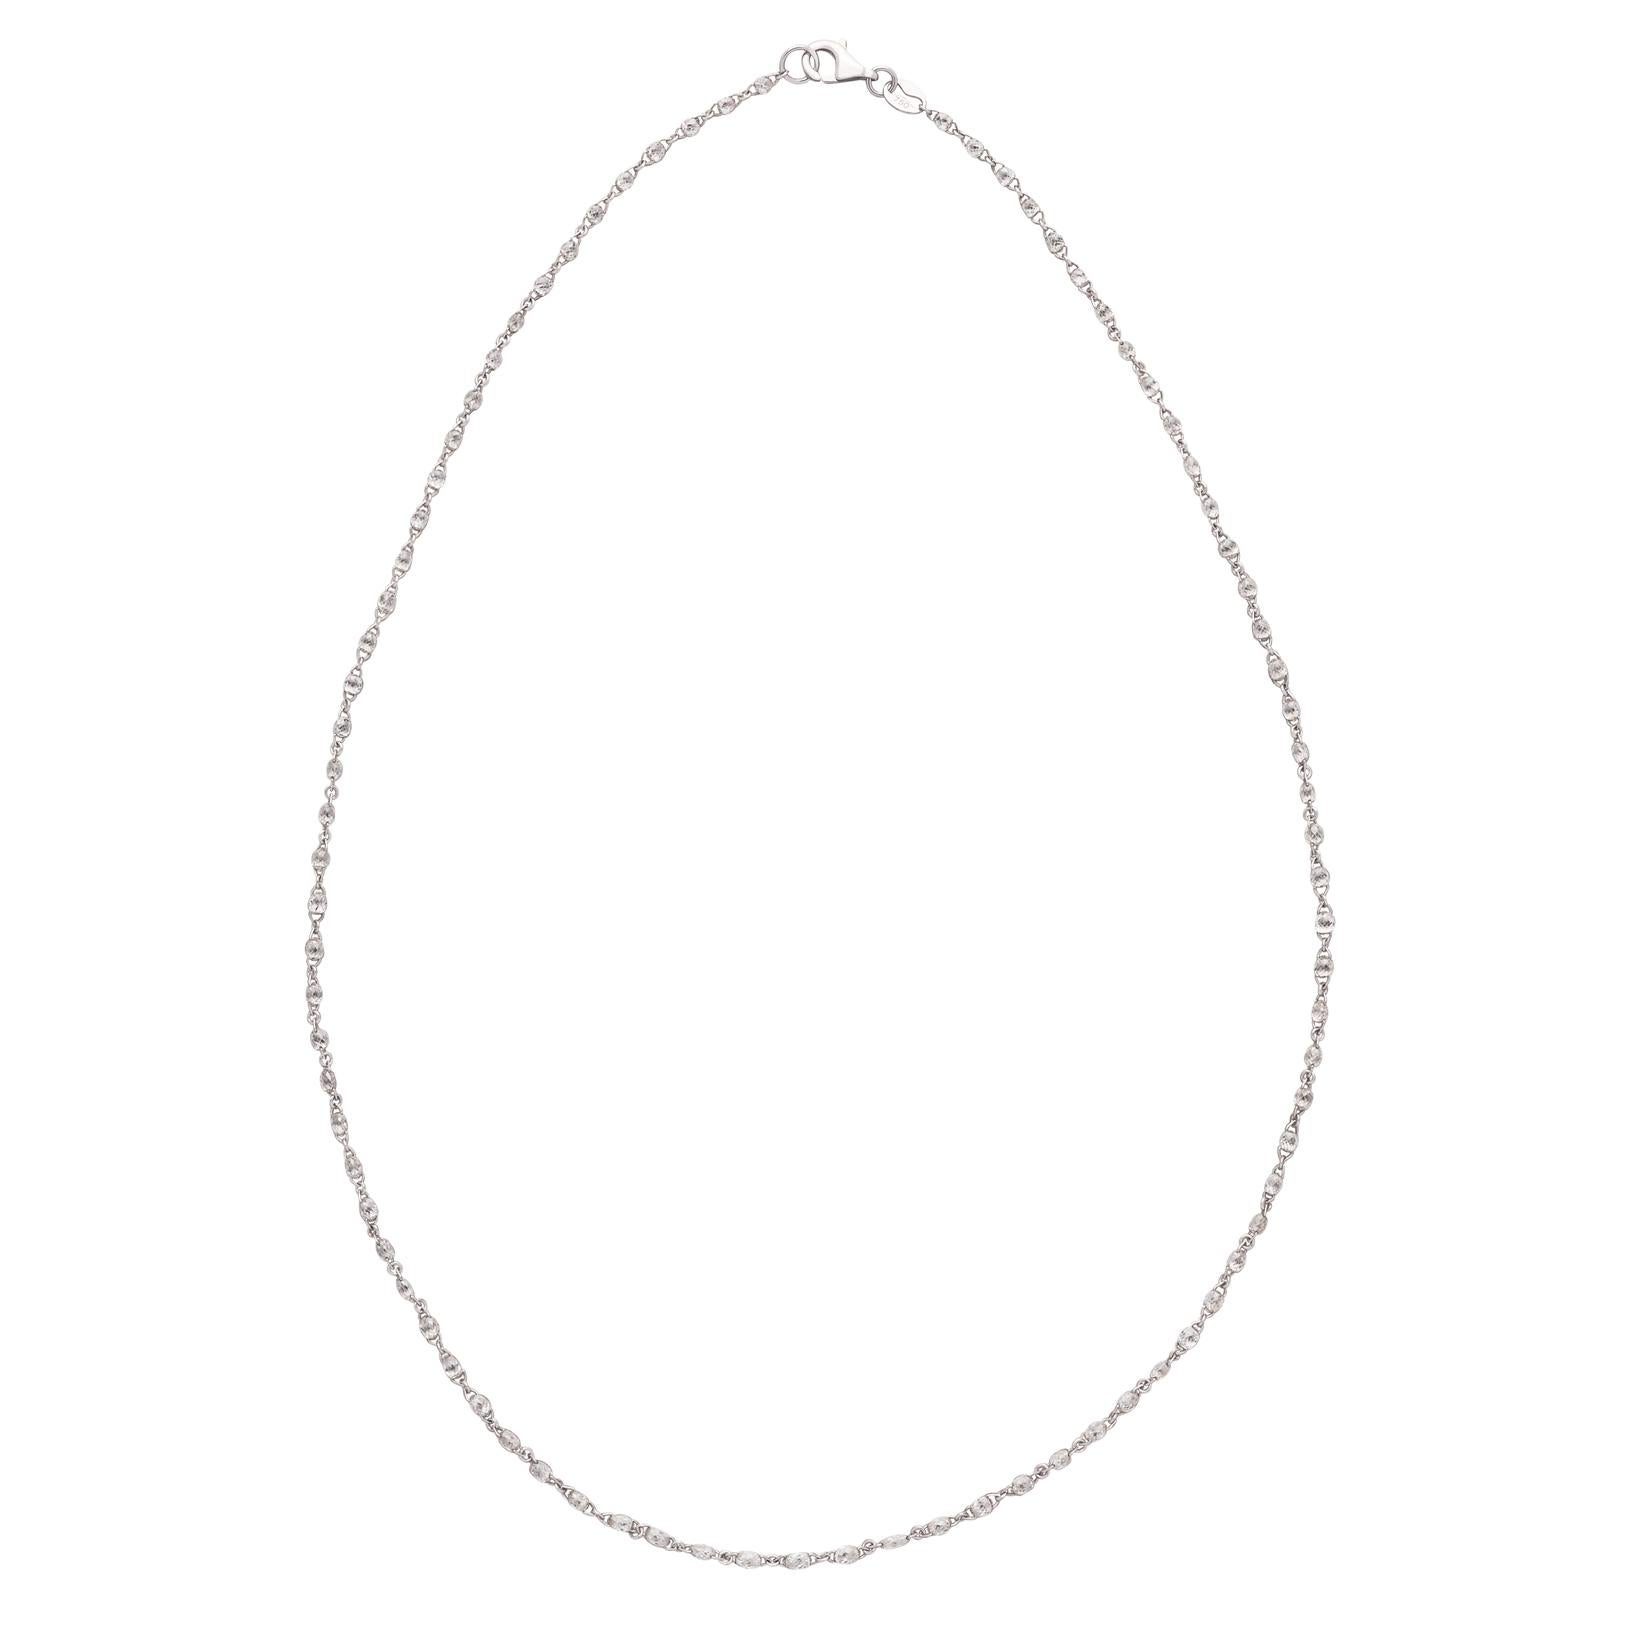 7.57 Carat Diamond Necklace in 18kt White Gold For Sale